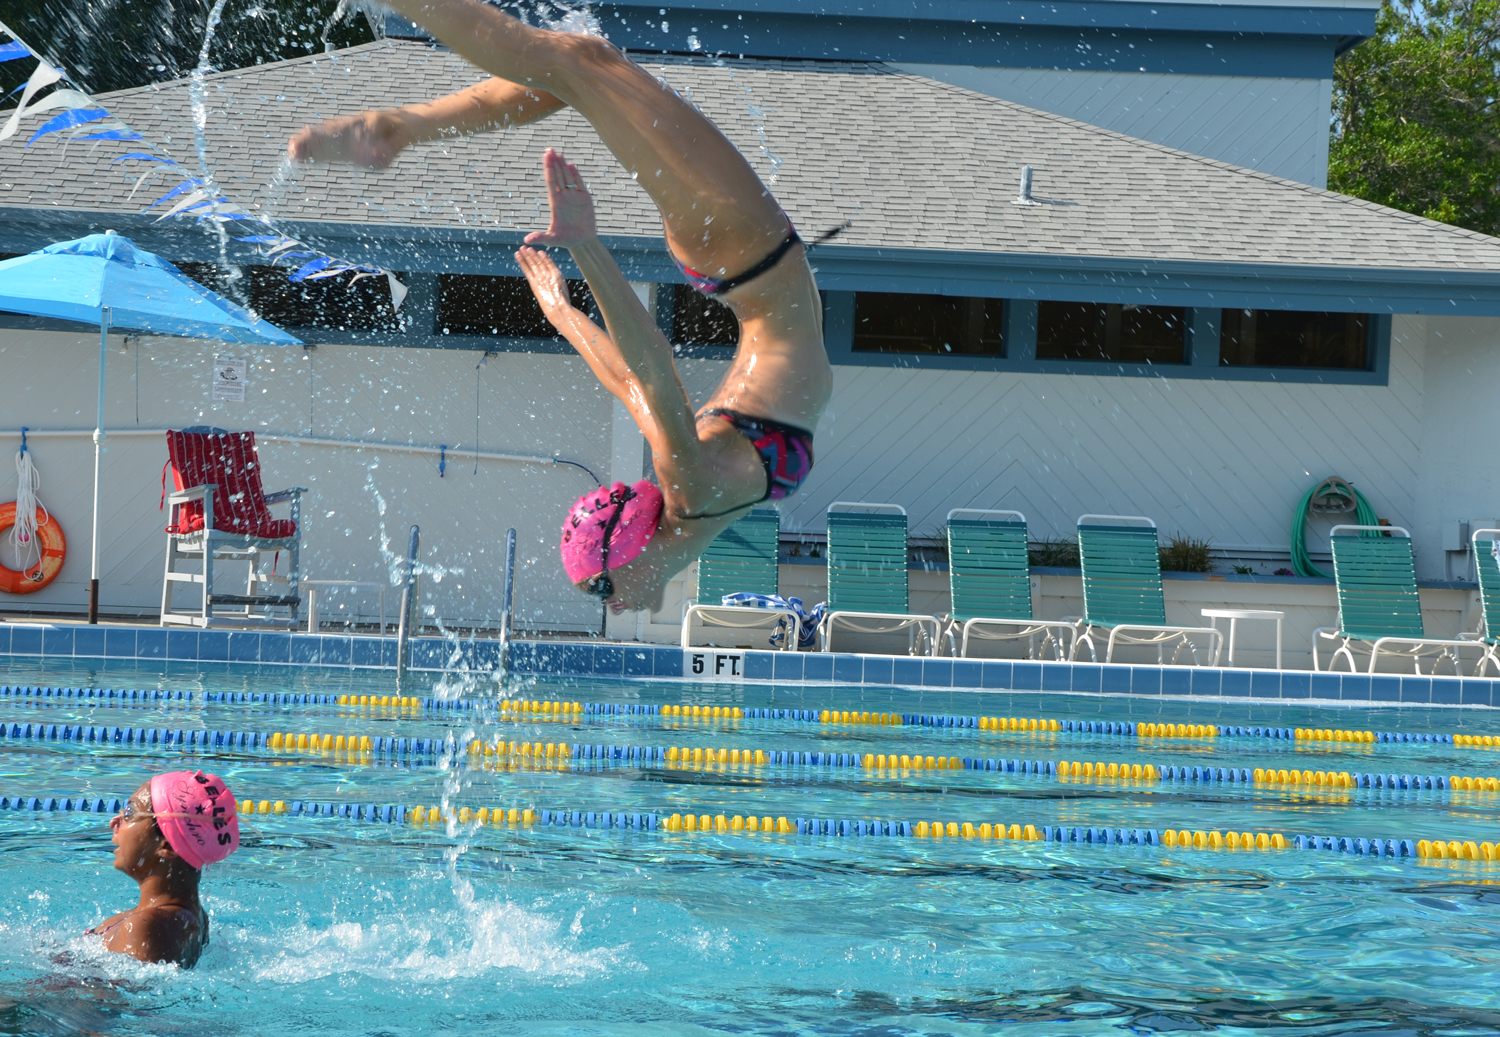 The Flagler County Synchro Belles' Carrie Hartnett flips out in a maneuver she executes with Alexis Solomon. Click on the image for larger view. (© FlaglerLive)